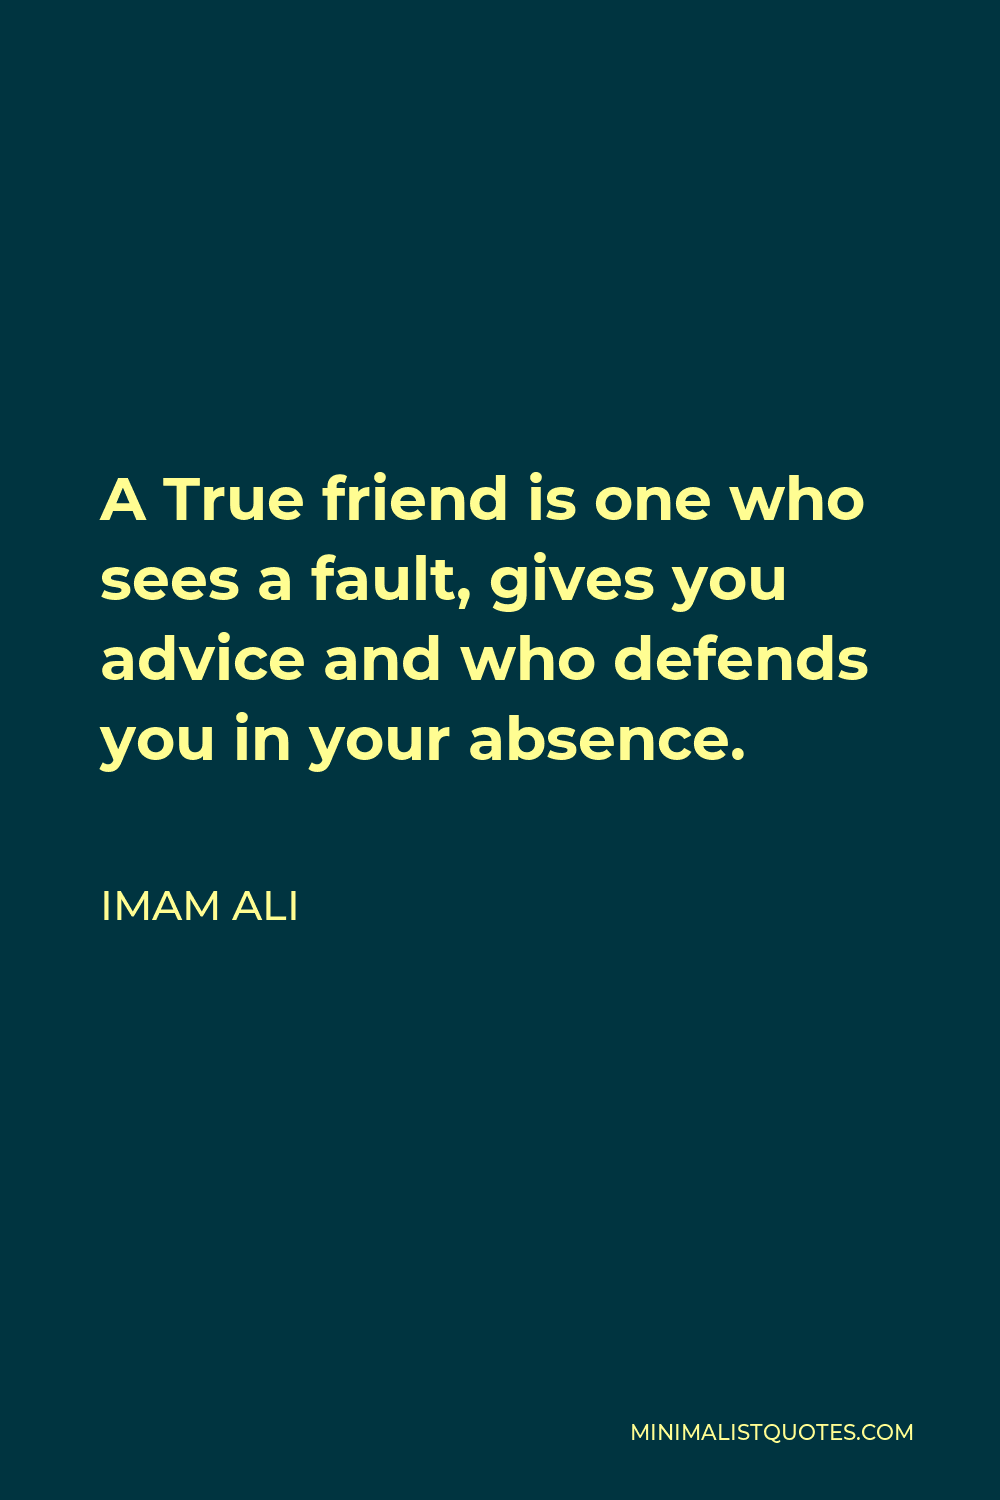 Imam Ali Quote - A True friend is one who sees a fault, gives you advice and who defends you in your absence.